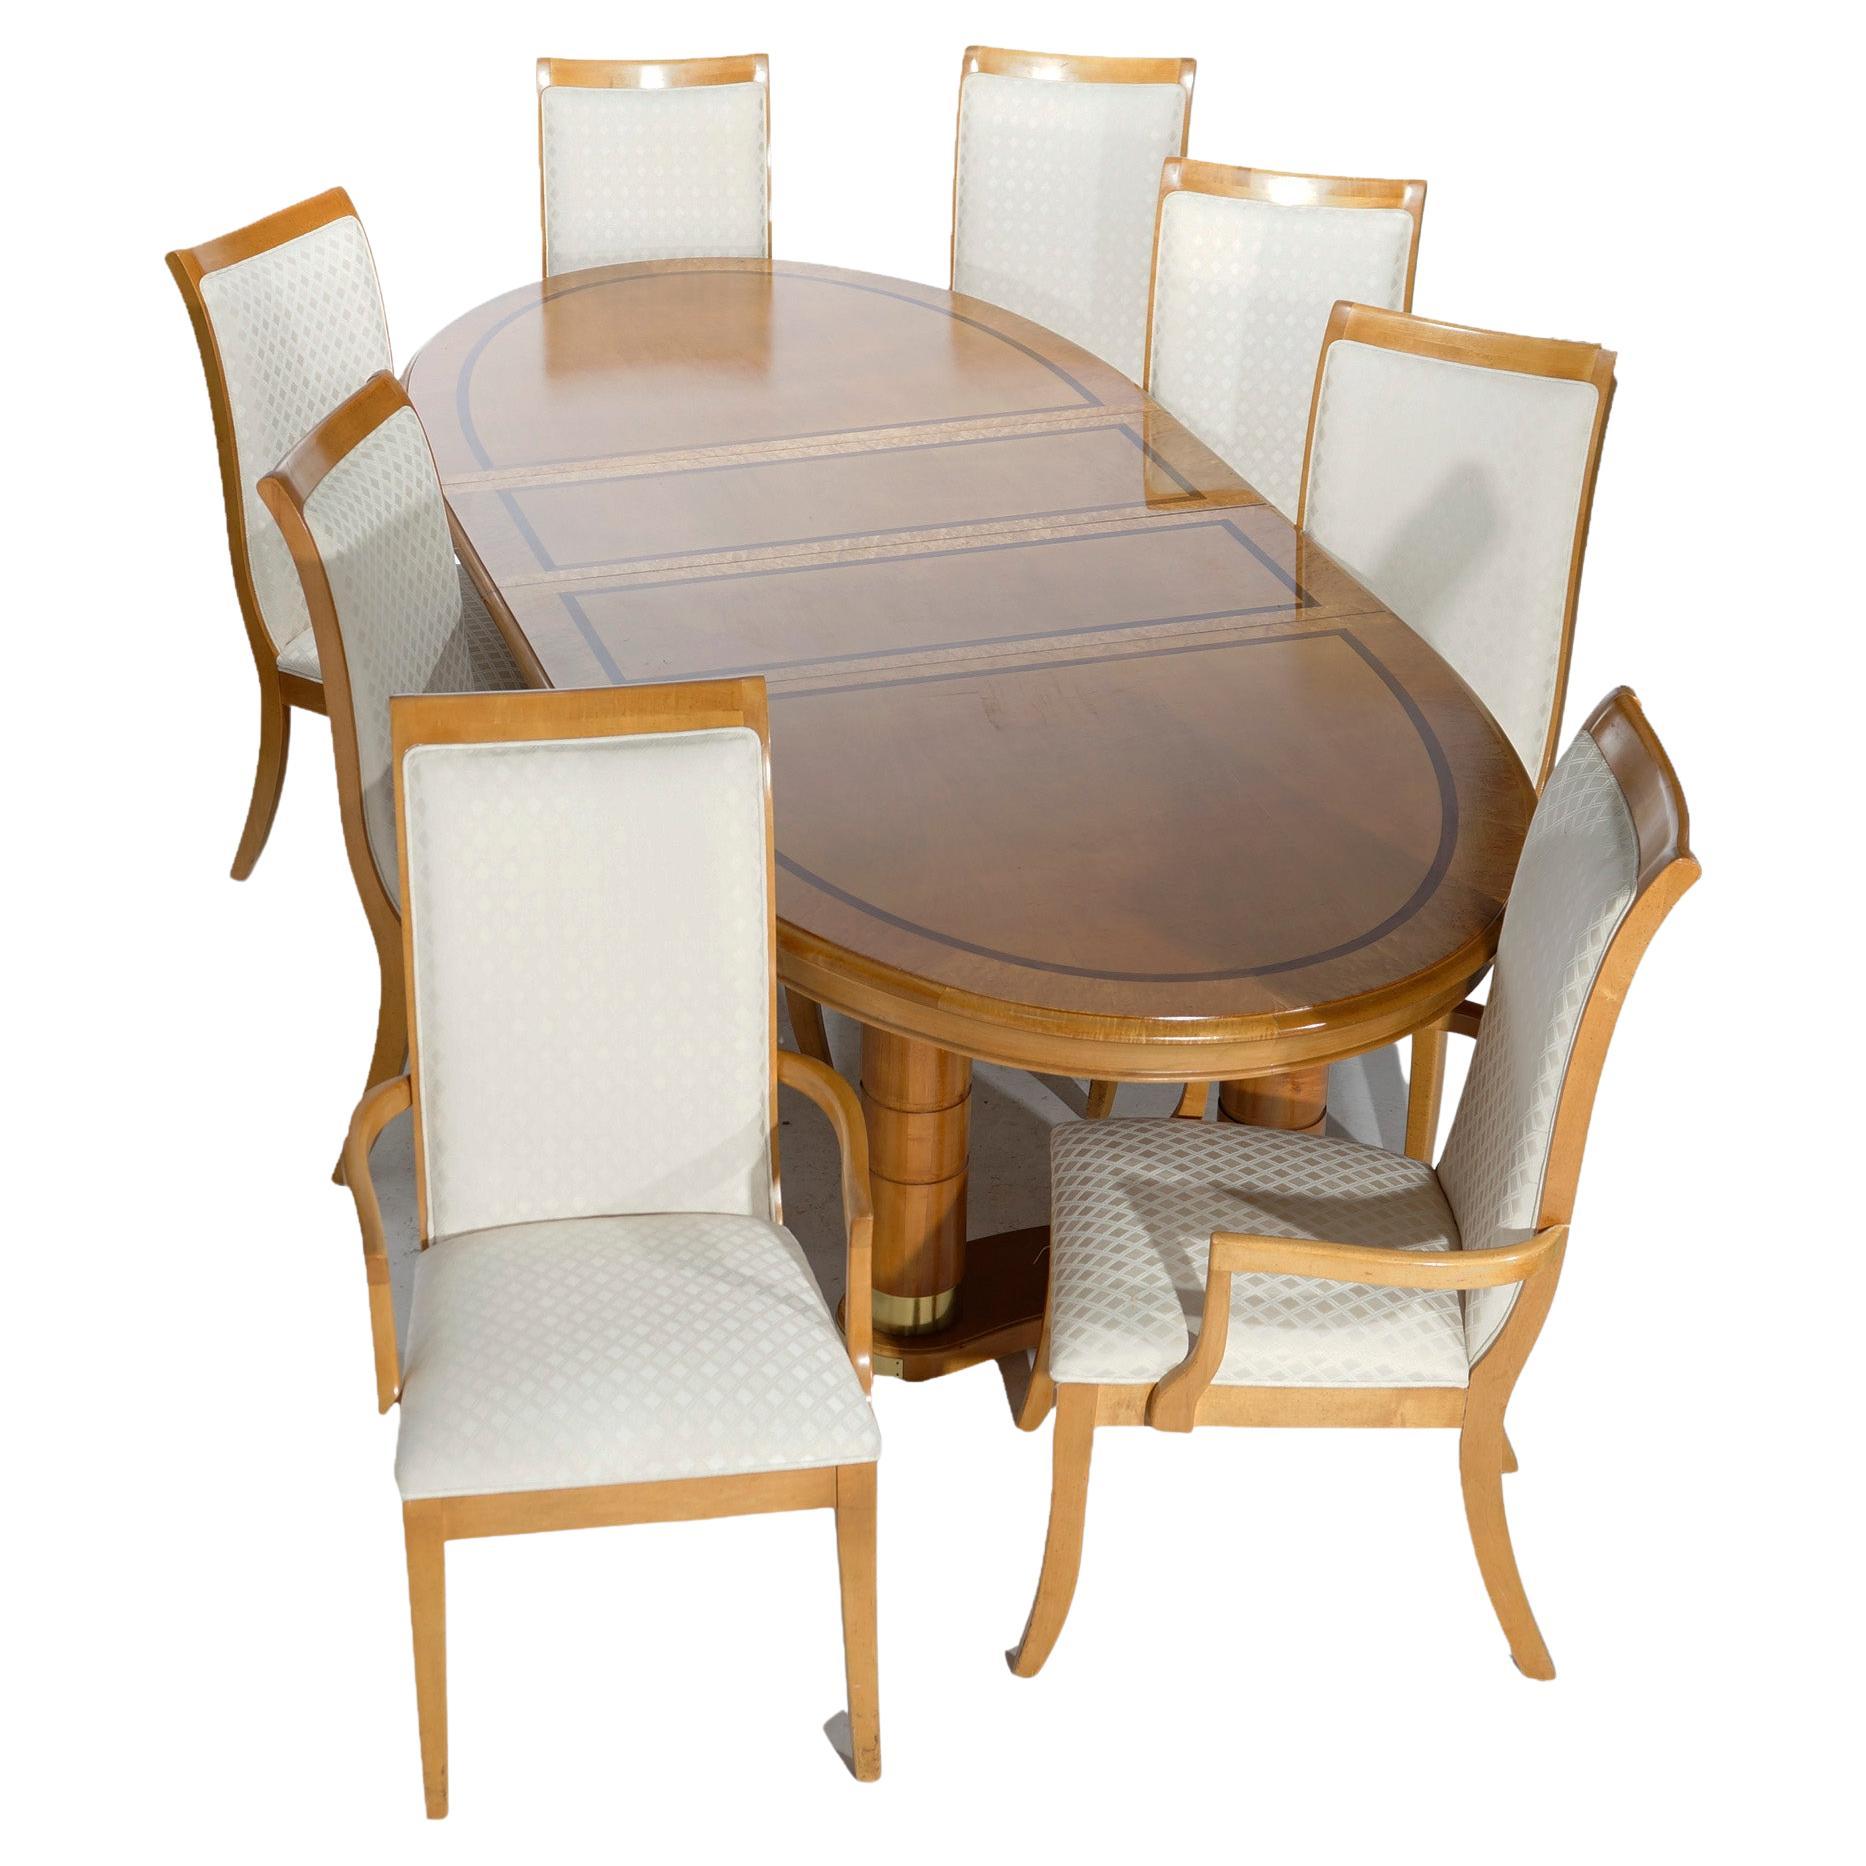 Regency Style Birds Eye Maple & Rosewood Inlay Dining Table & Eight Chairs 20thC